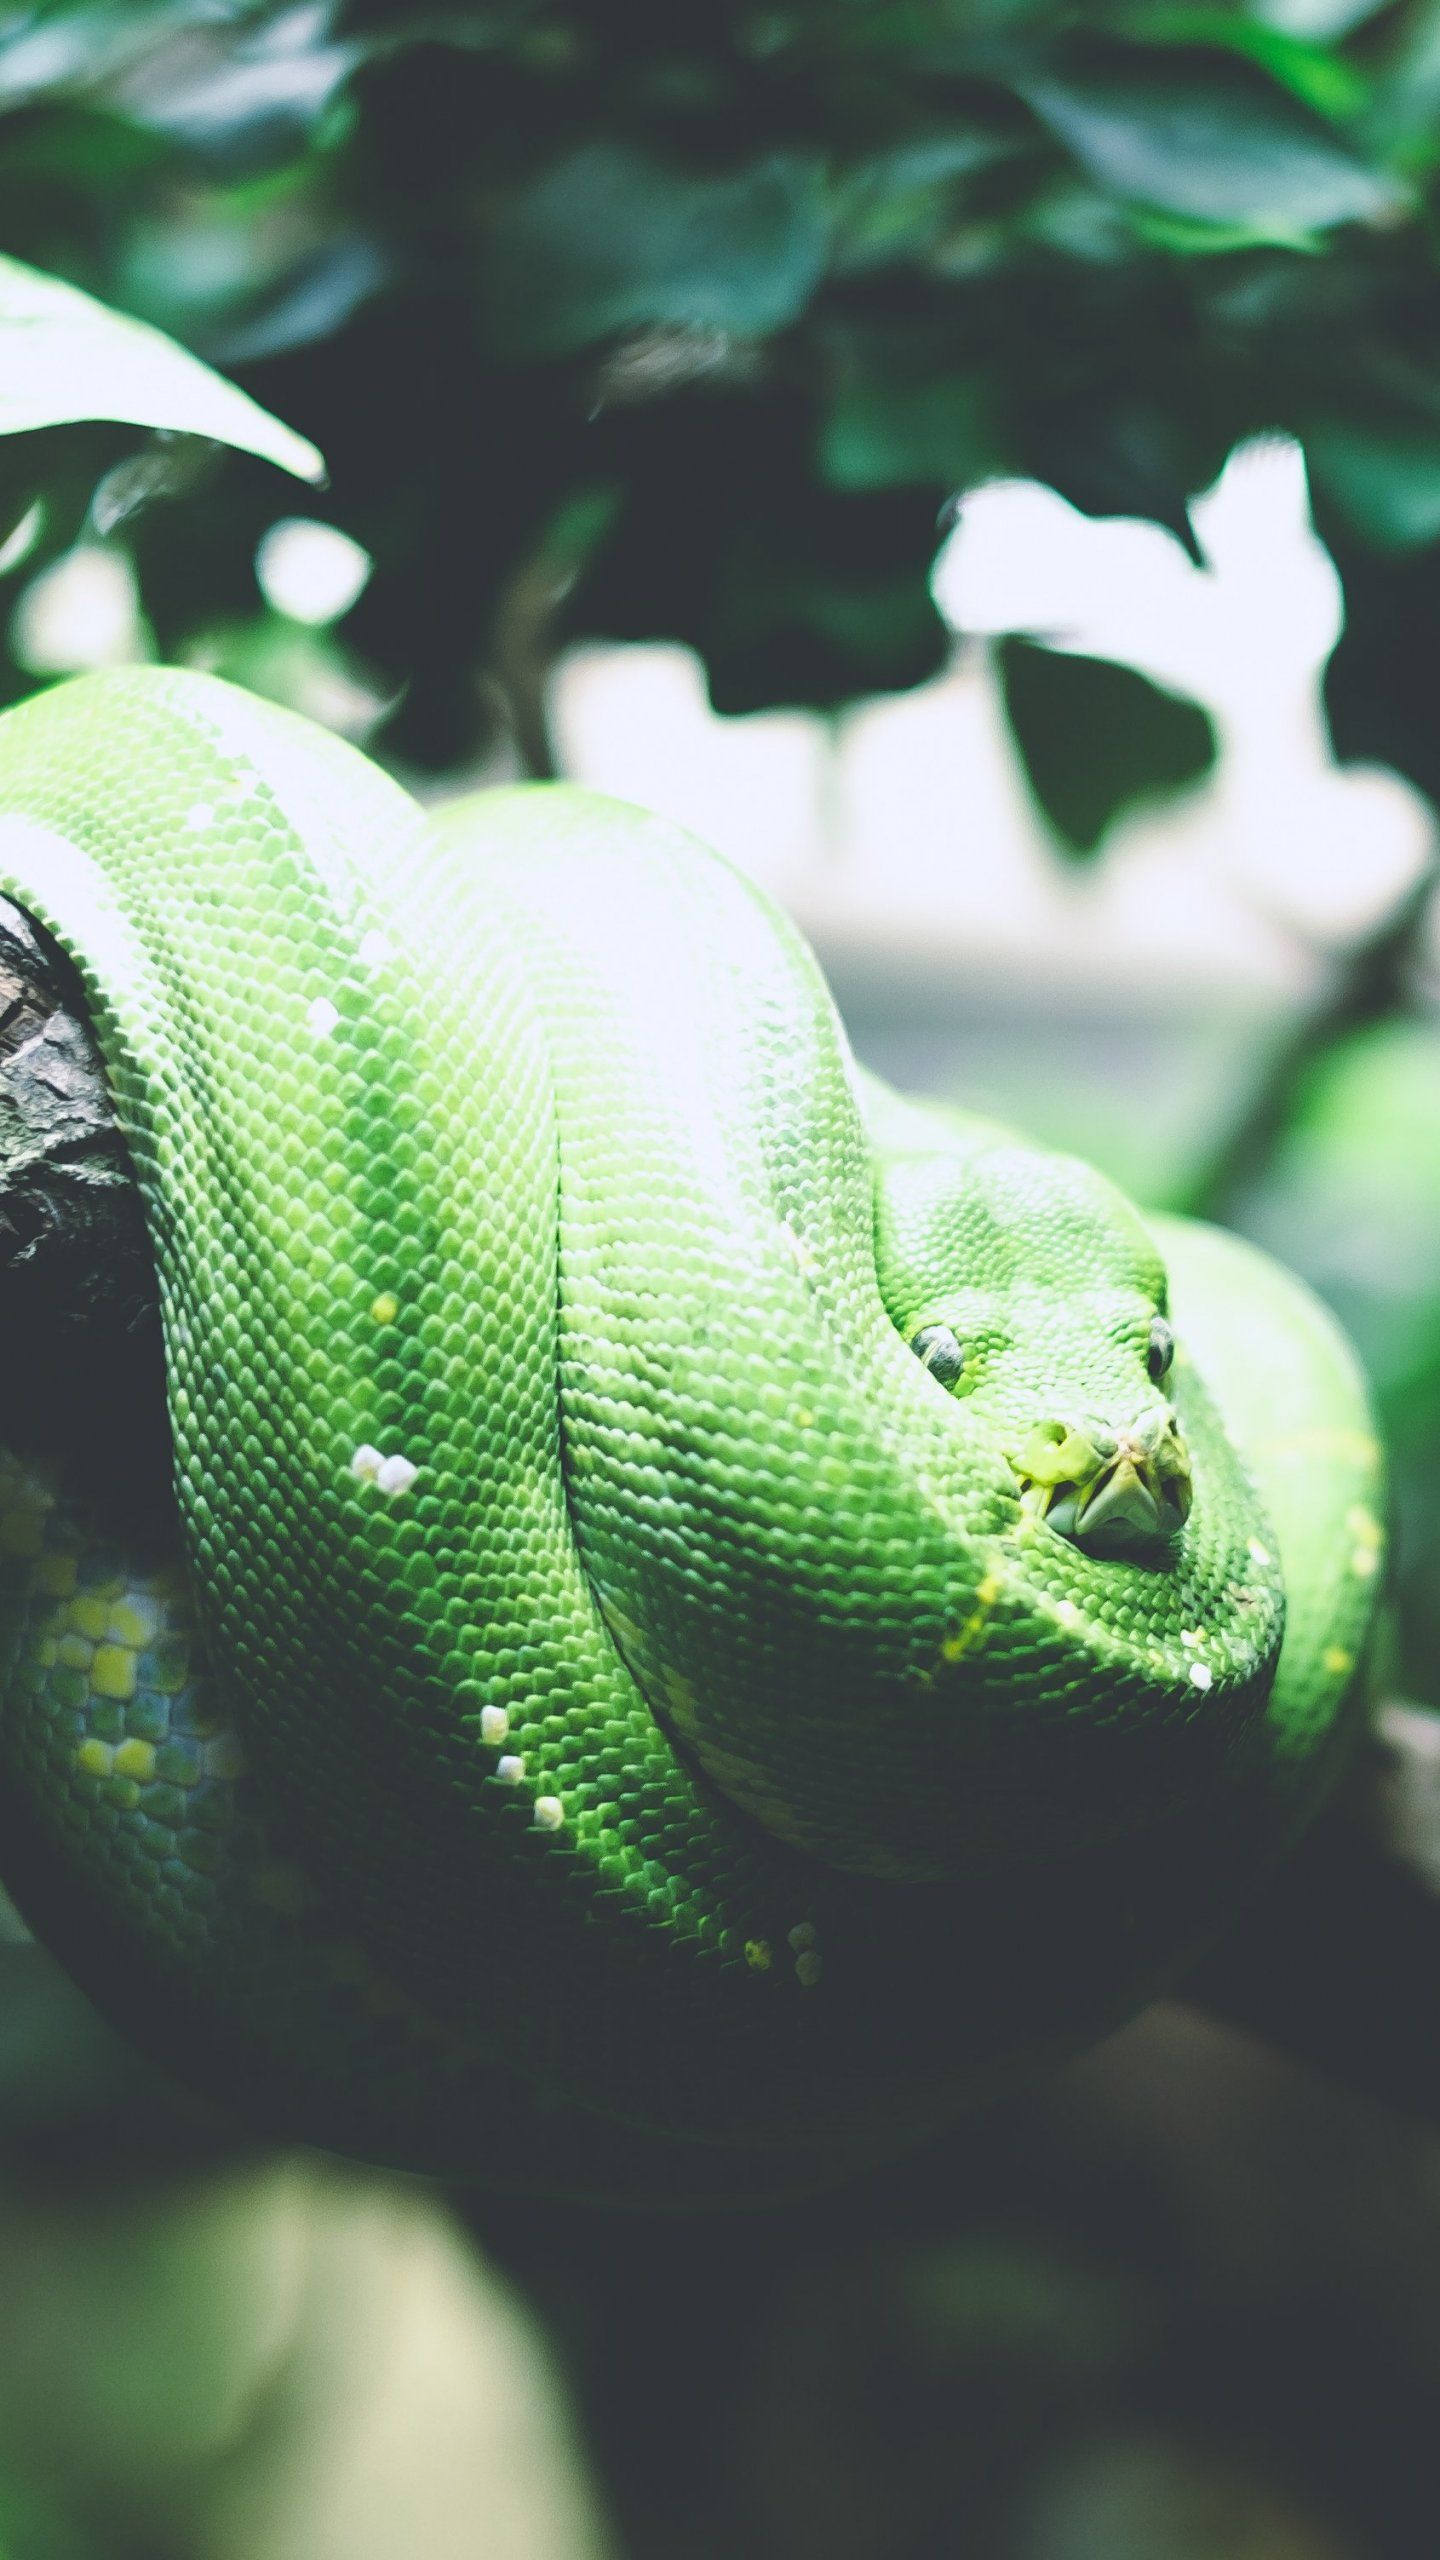 1440x2560 Tree Snake Wallpaper Iphone Android Desktop Background